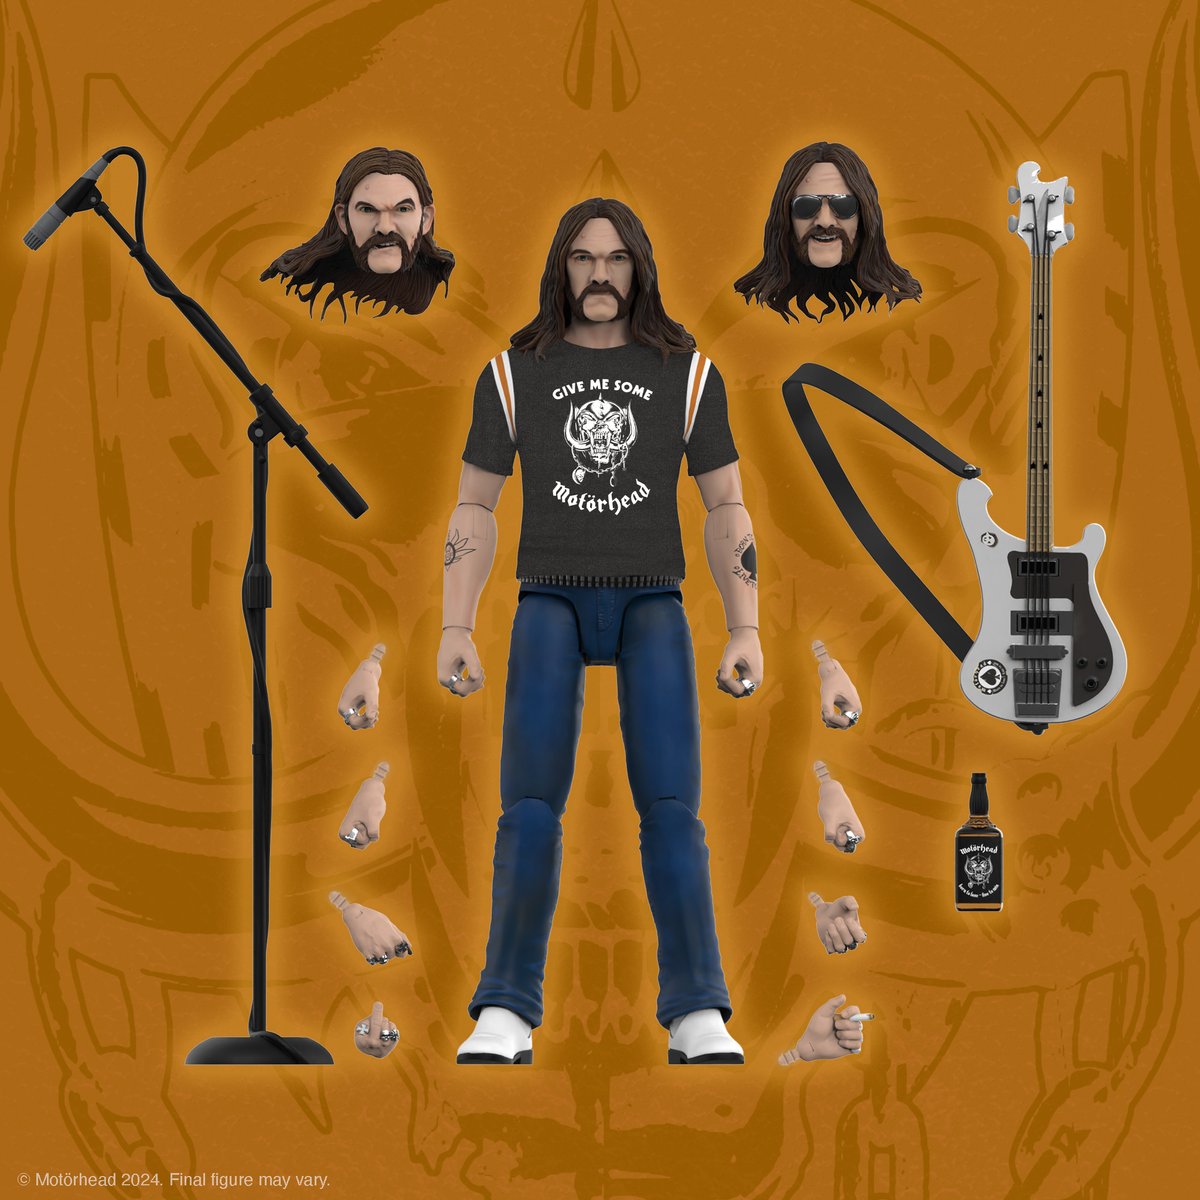 Lemmy’s signature mutton chops, gravelly voice, and unique way of playing the bass guitar helped solidify Motörhead as one of heavy metal’s pioneering acts! This Motörhead ULTIMATES! Lemmy figure is available to pre-order now: bit.ly/4cTfkrN #Super7 @myMotorhead